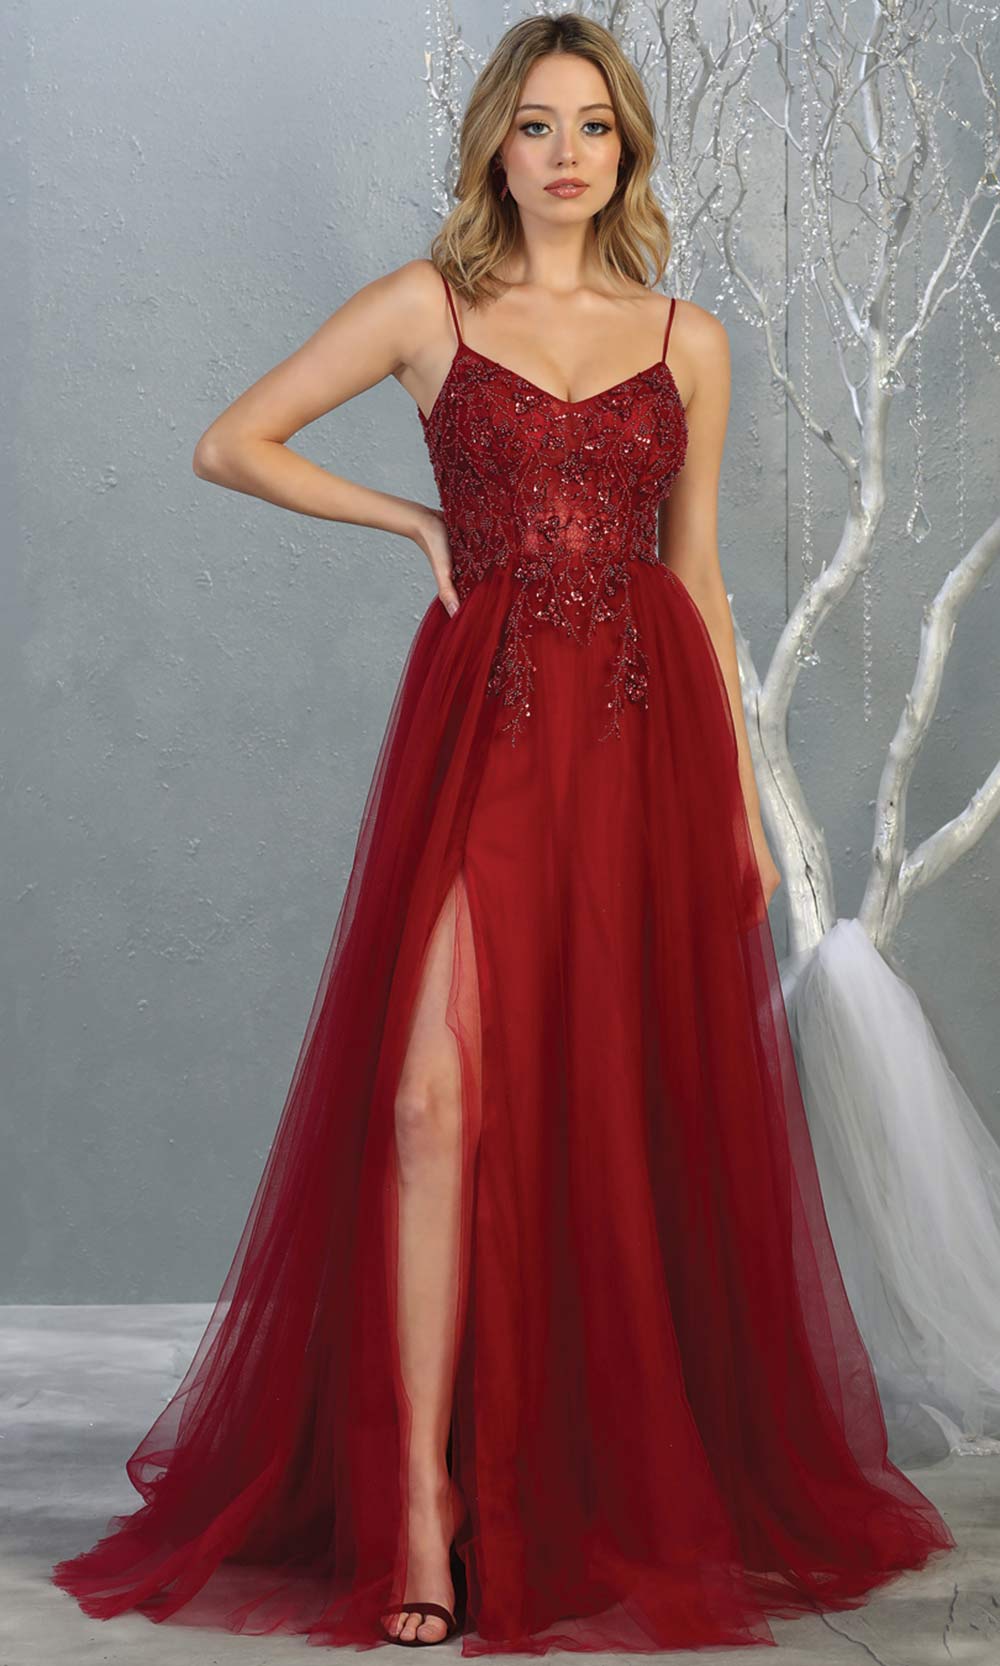 Mayqueen MQ1778 long burgundy red scoop neck flowy tulle skirt dress with high slit. Perfect for prom, engagement dress, e-shoot dress, formal wedding guest dress, debut, quinceanera, sweet 16, gala. Plus sizes avail in this dark red semi ballgown.jpg